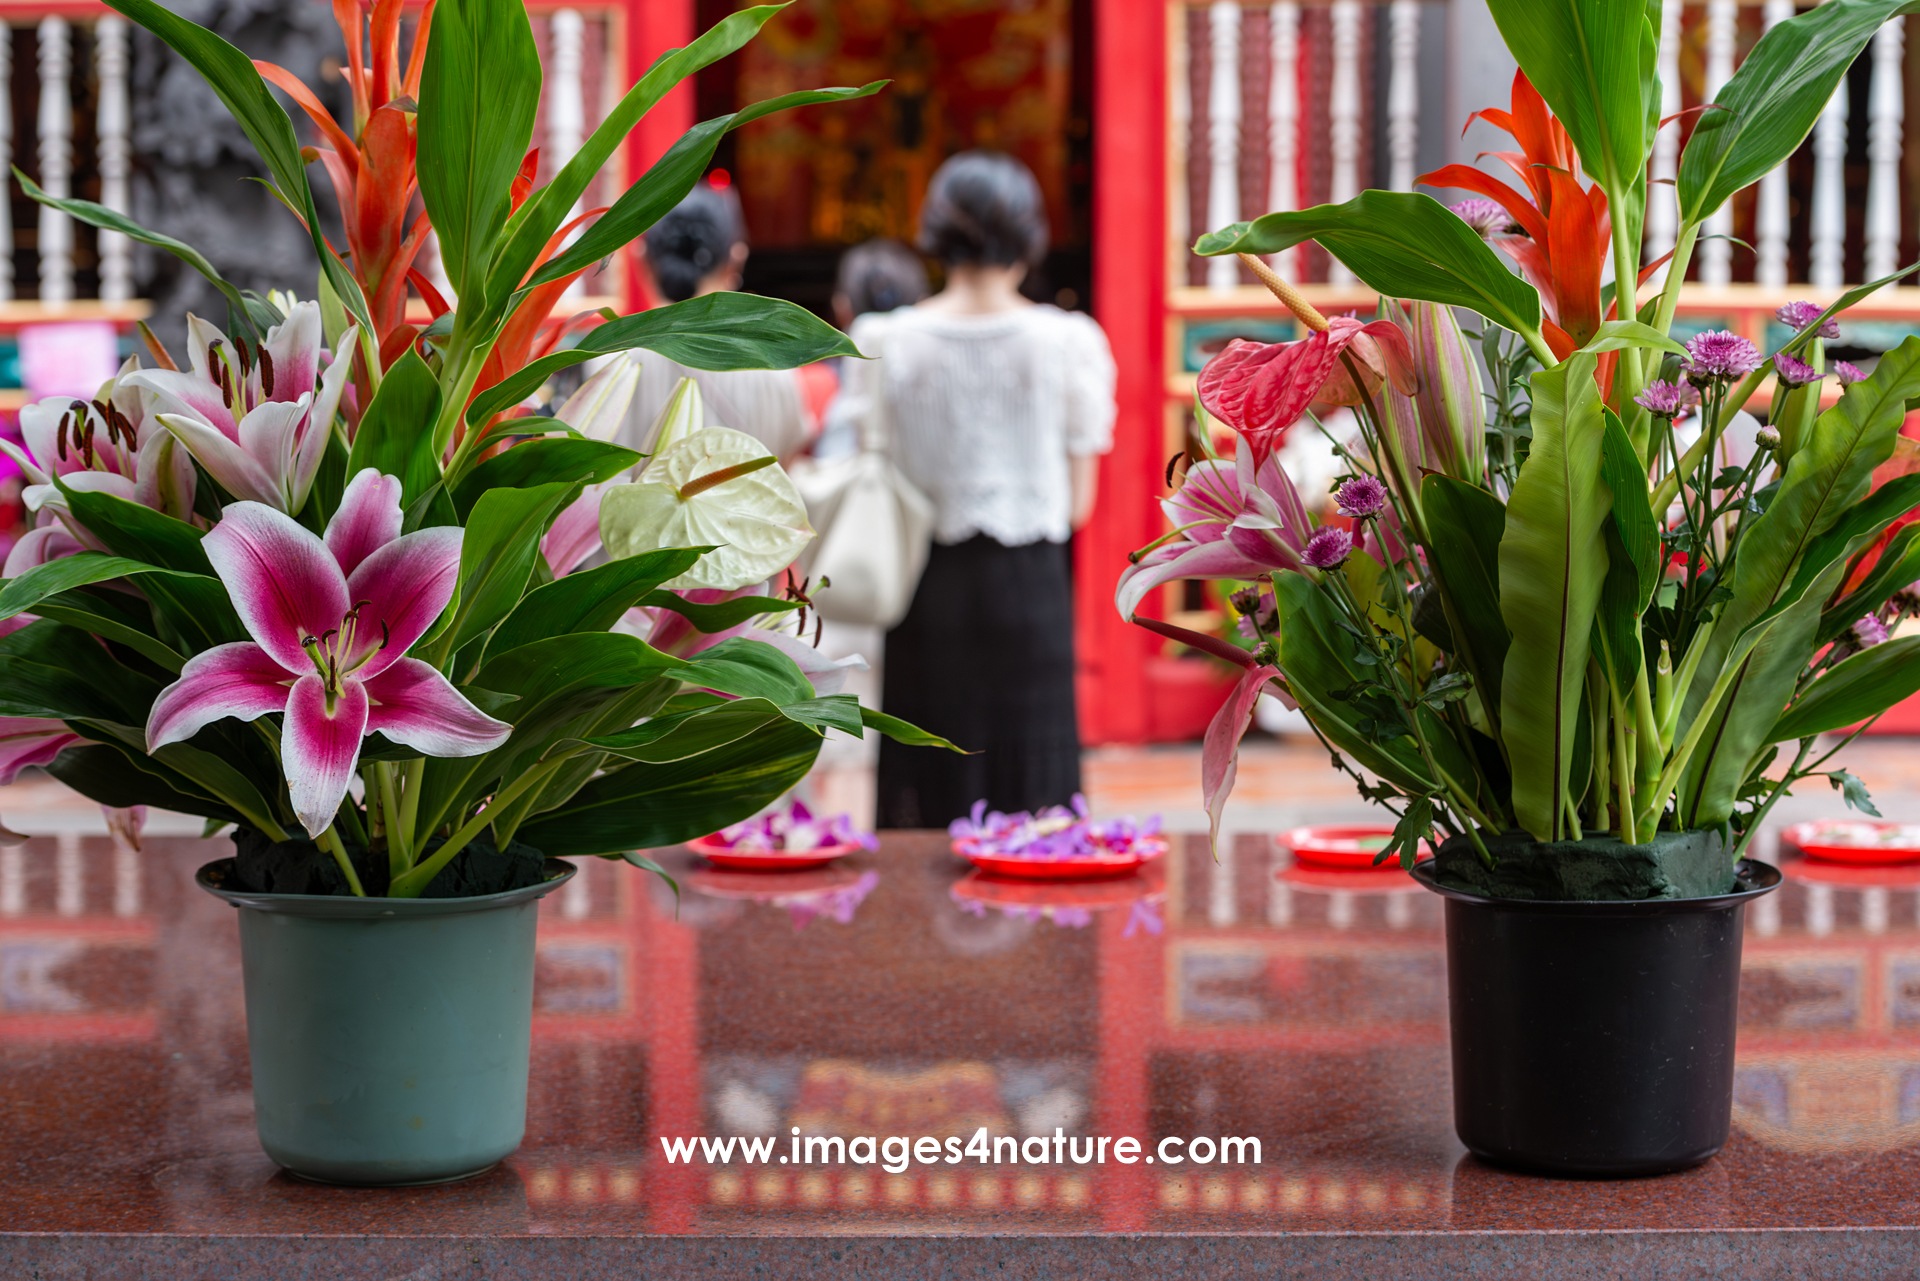 Two pots with beautiful flowers framing pilgrims praying at a buddhist temple